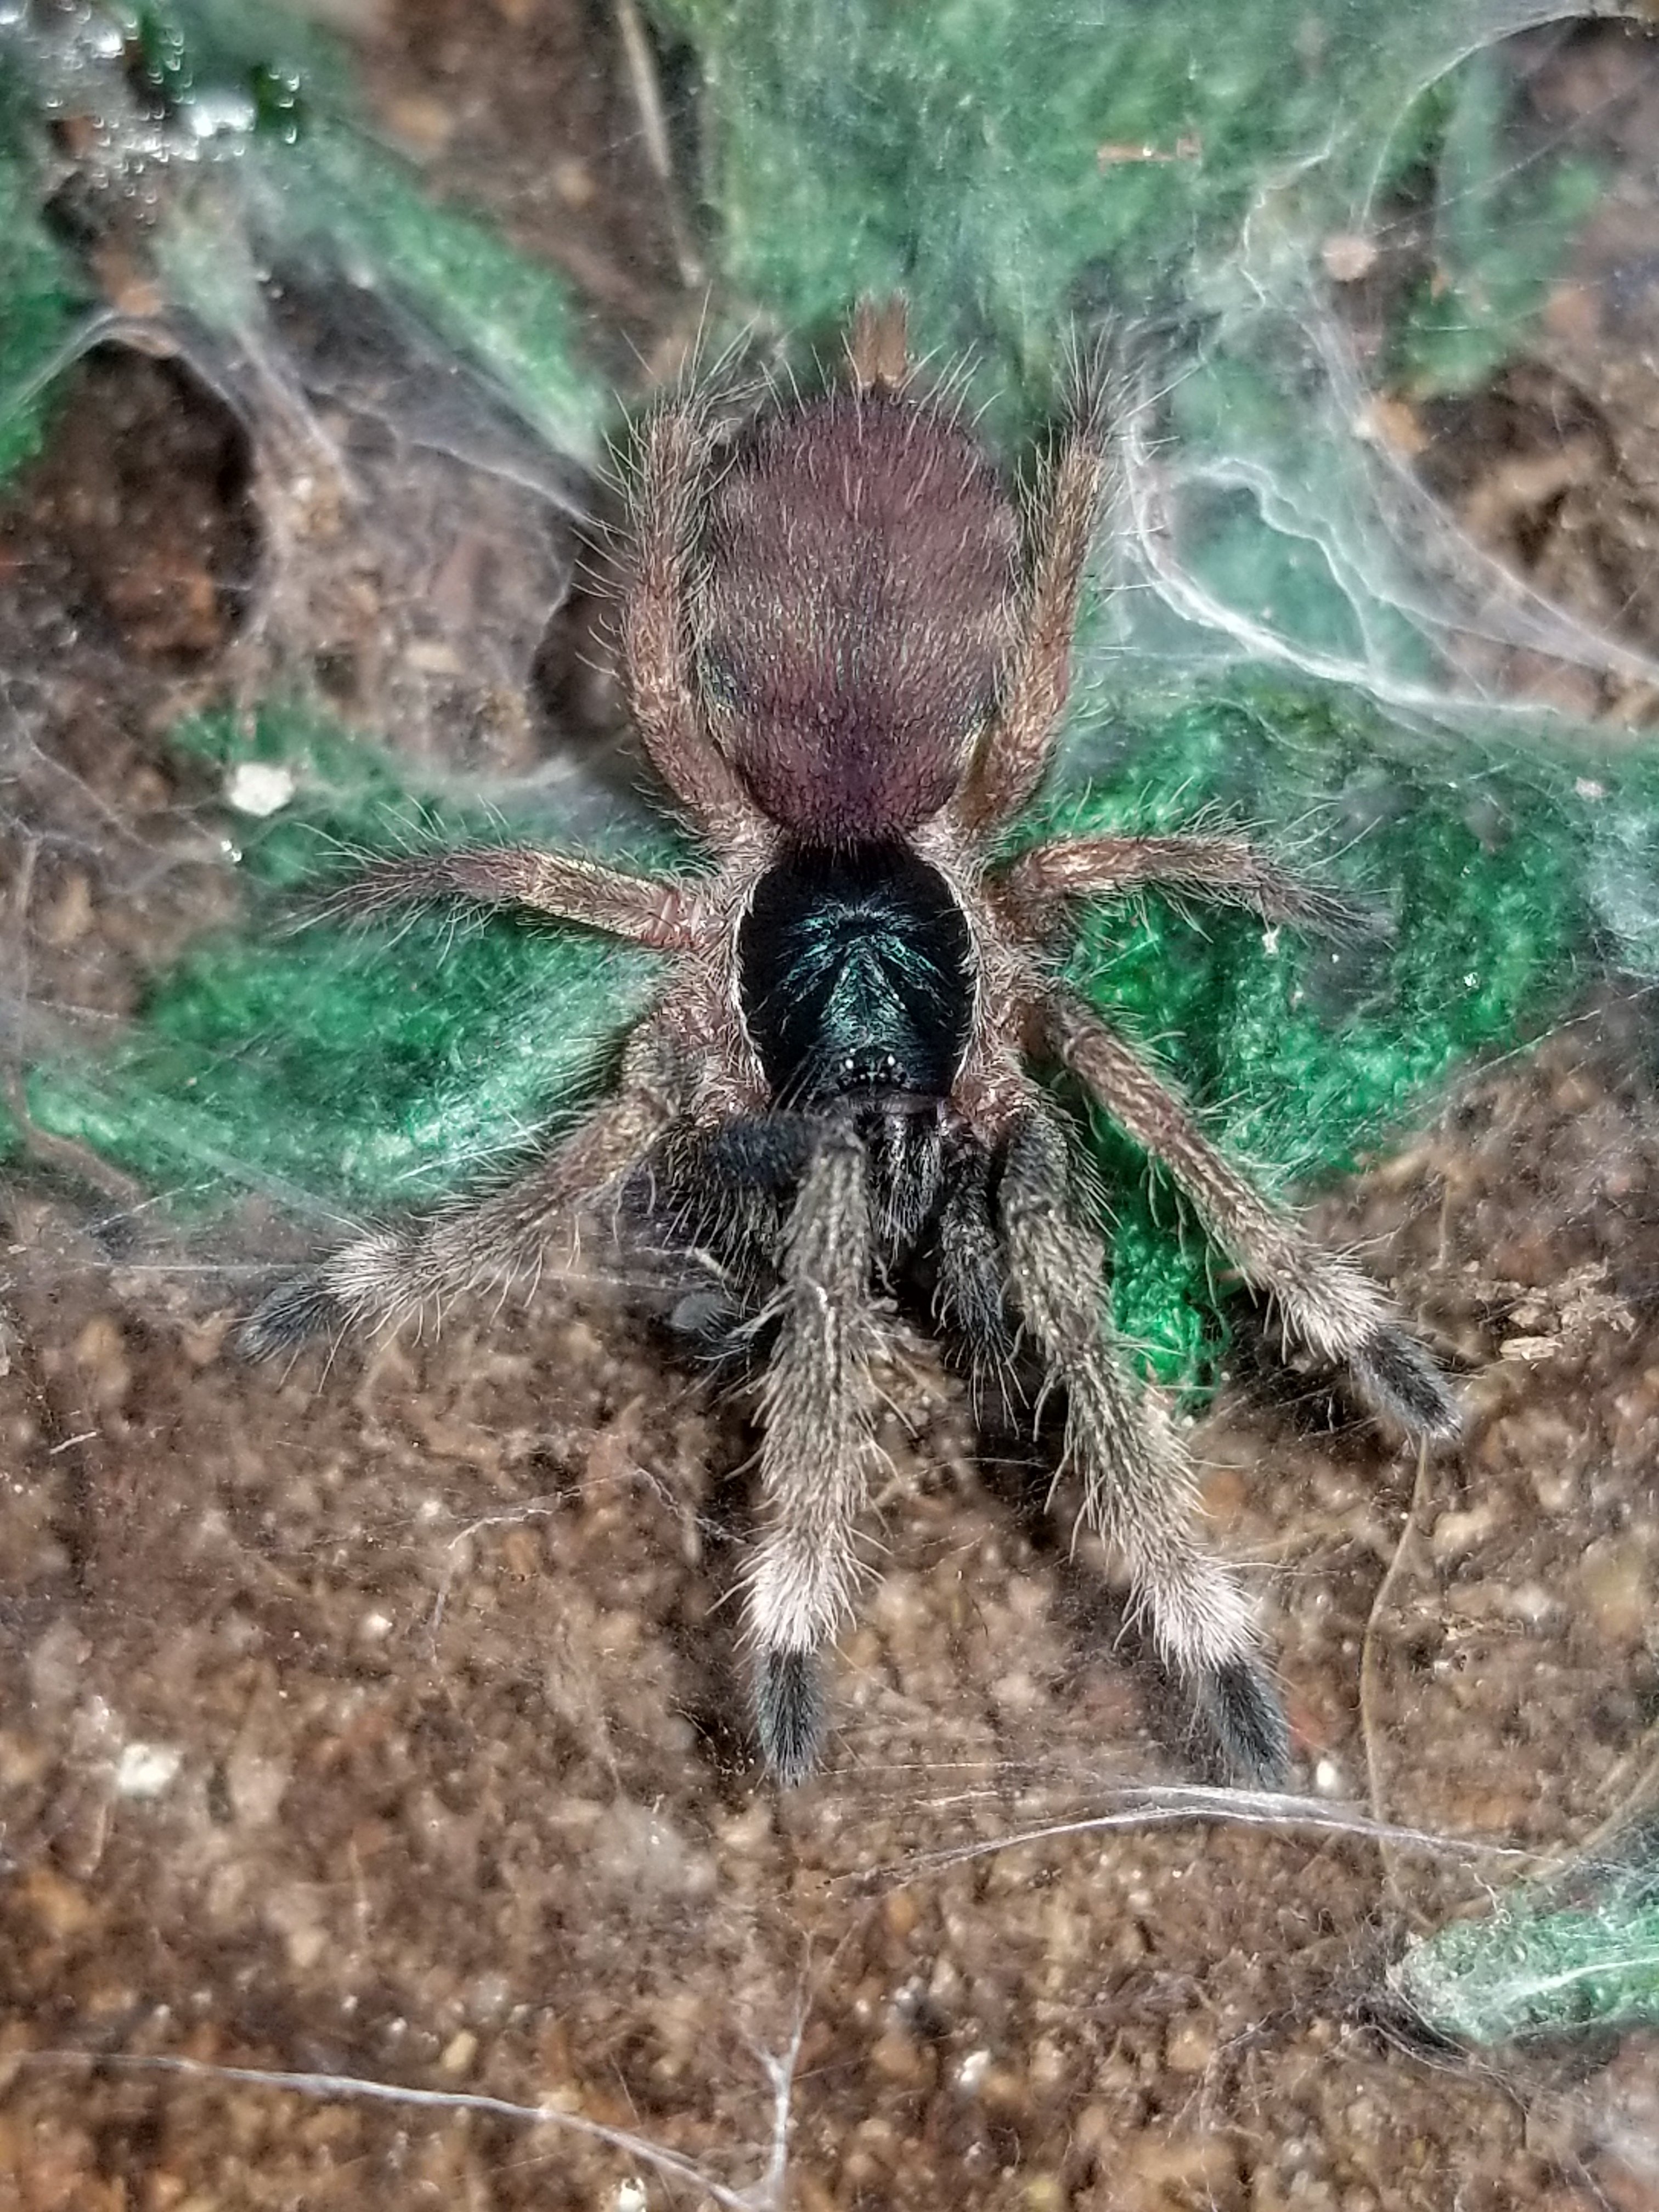 H. incei sling